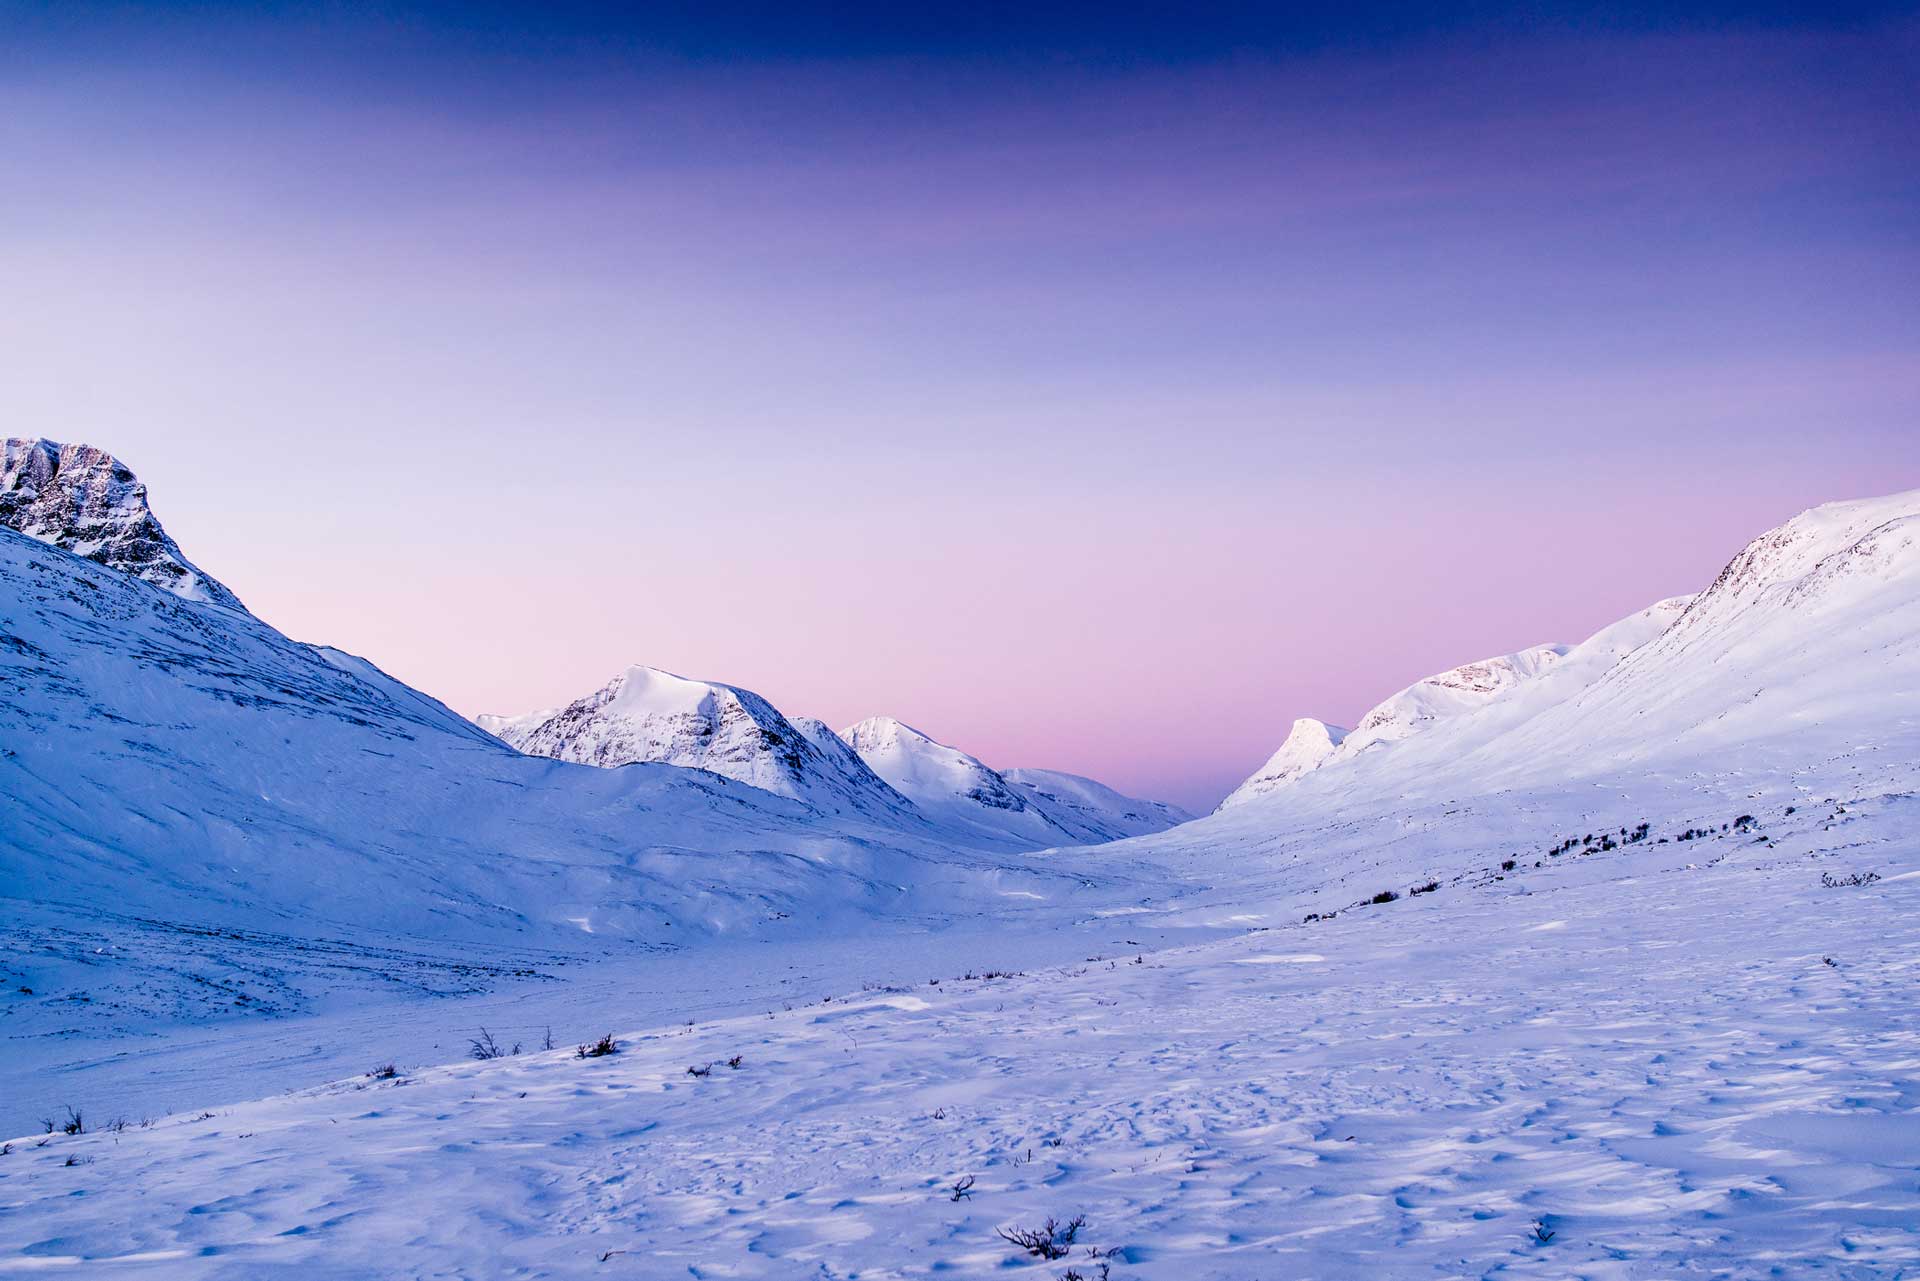 Purple and pink sky with snow covered mountains